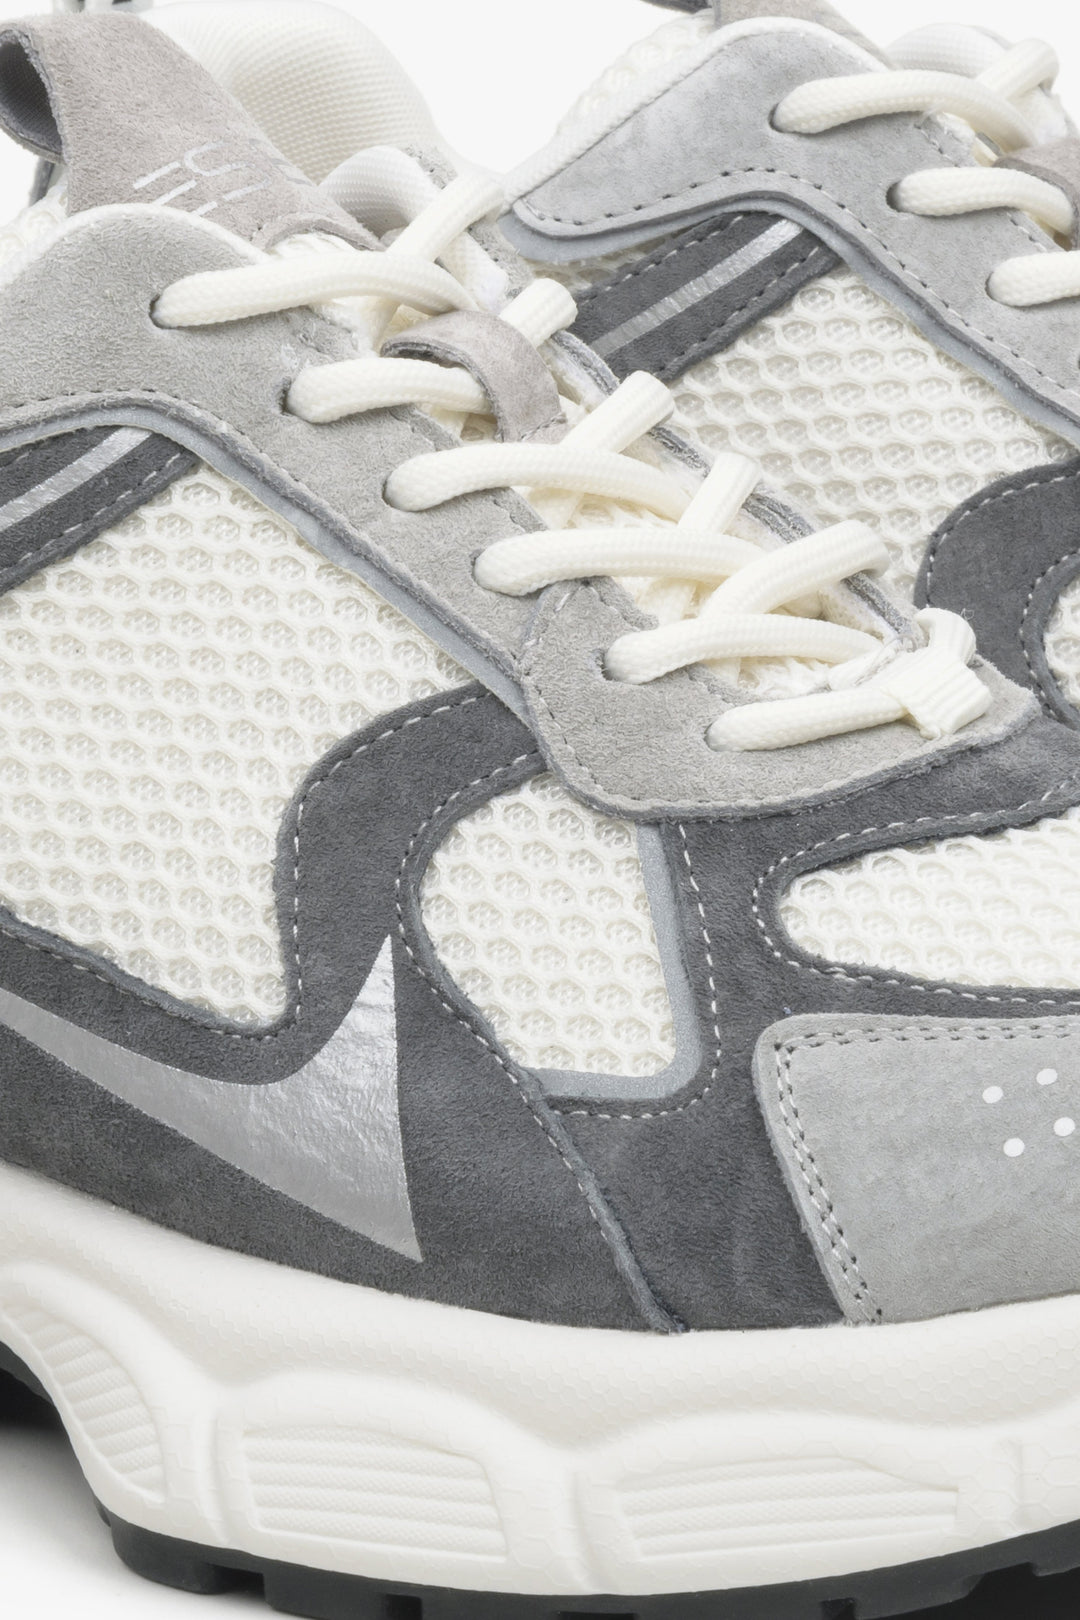 Women's white and grey sneakers ES 8 - close-up on details.